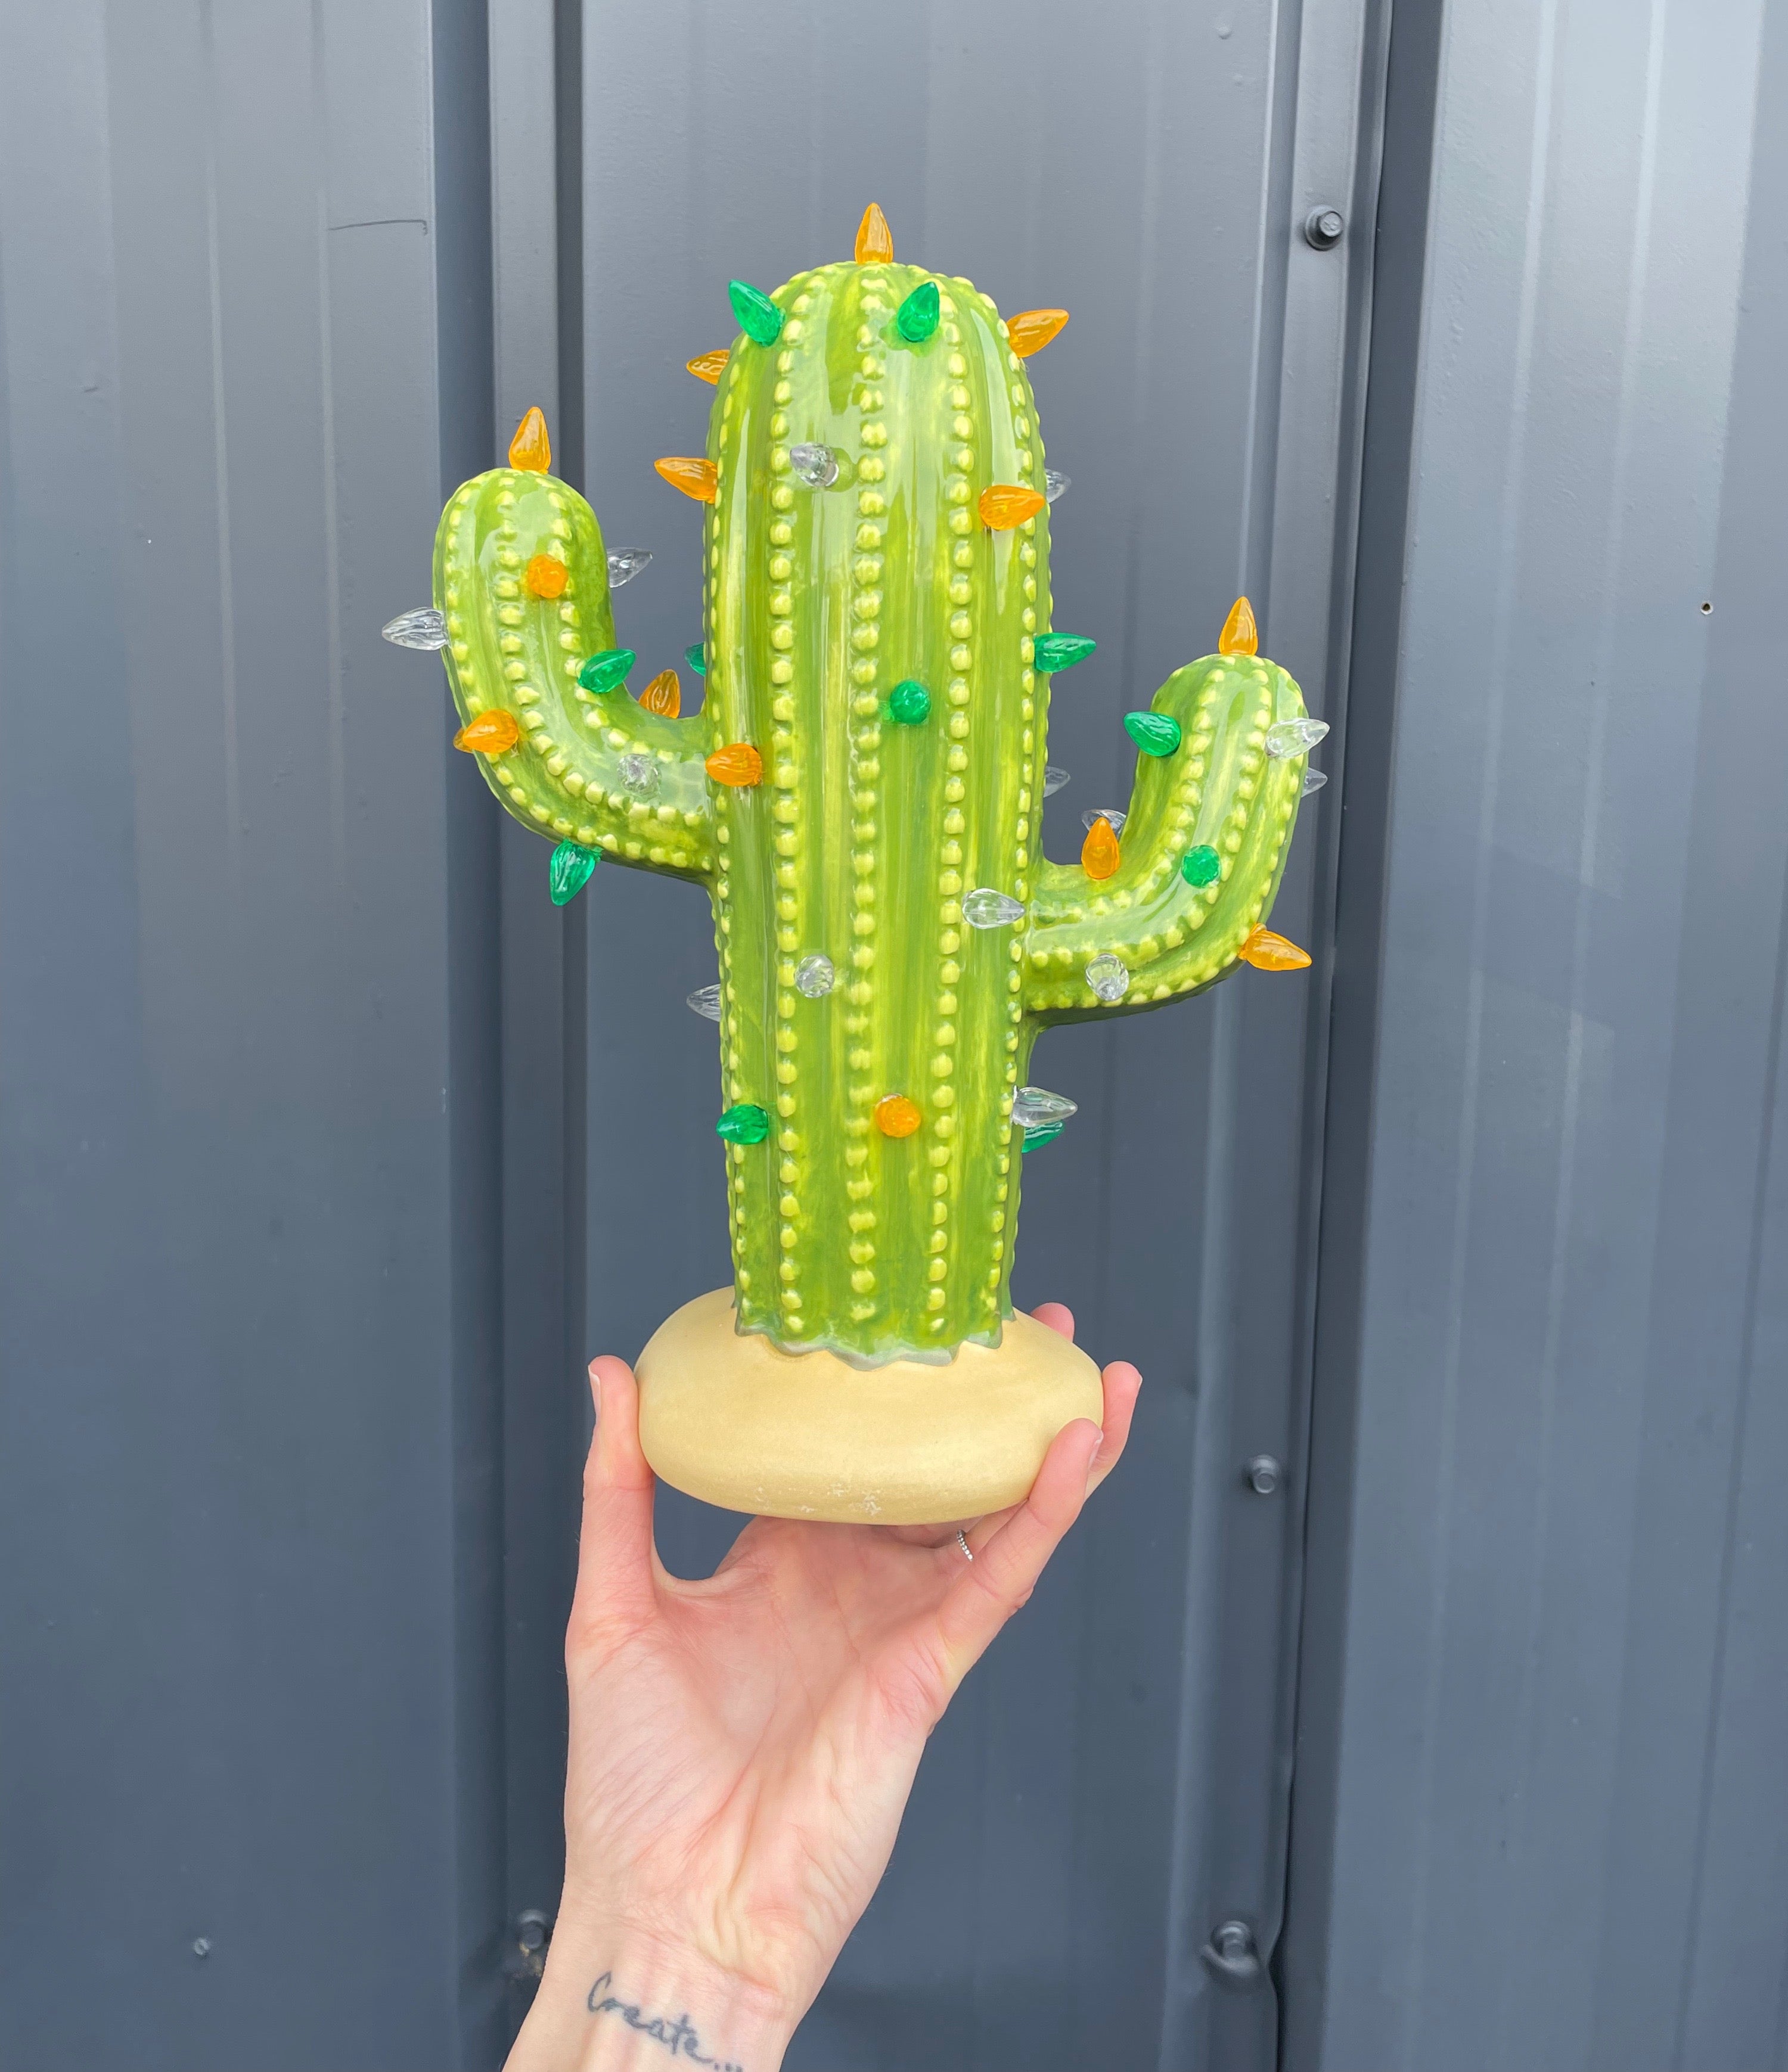 Holding St. Patrick's Day ceramic cactus by Brush Strokes Pottery